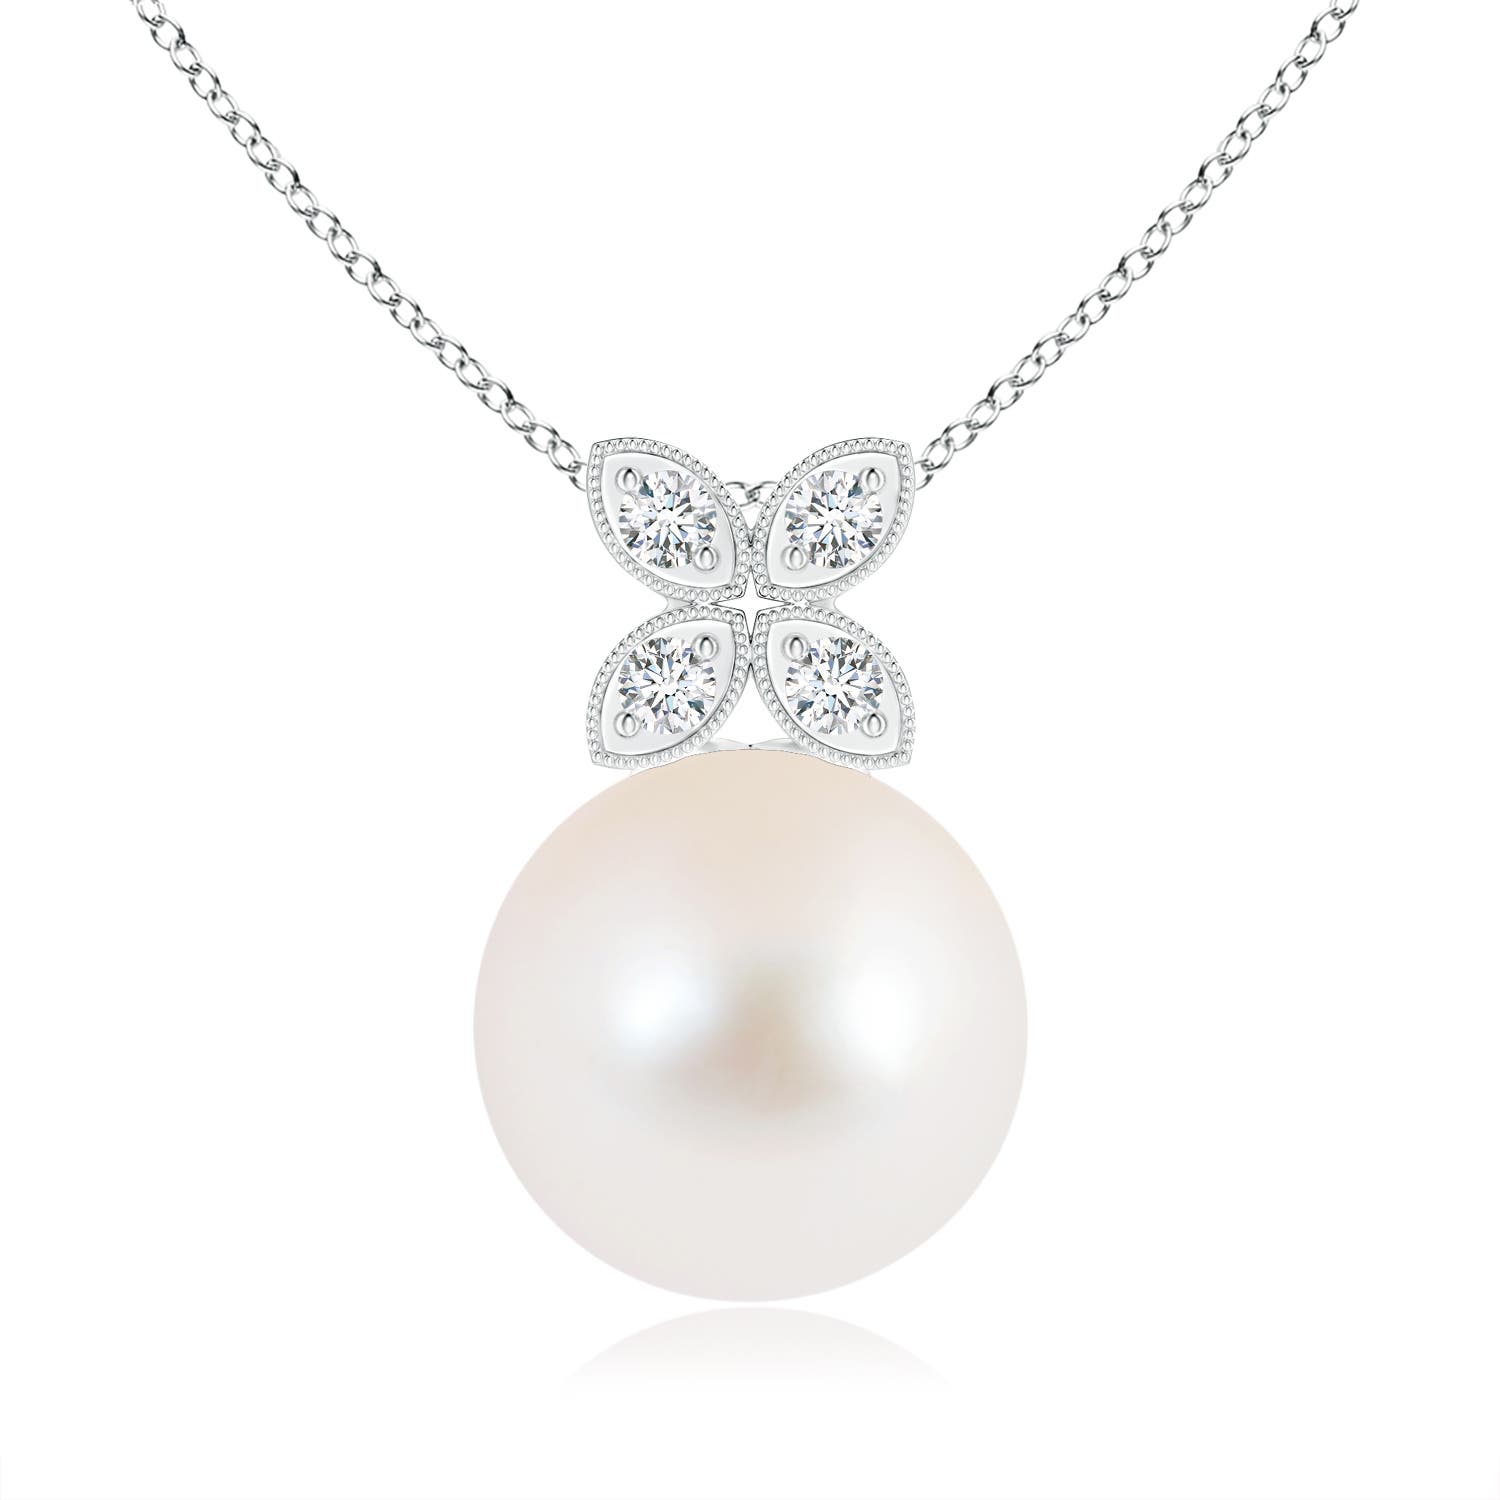 AAA - Freshwater Cultured Pearl / 7.3 CT / 14 KT White Gold